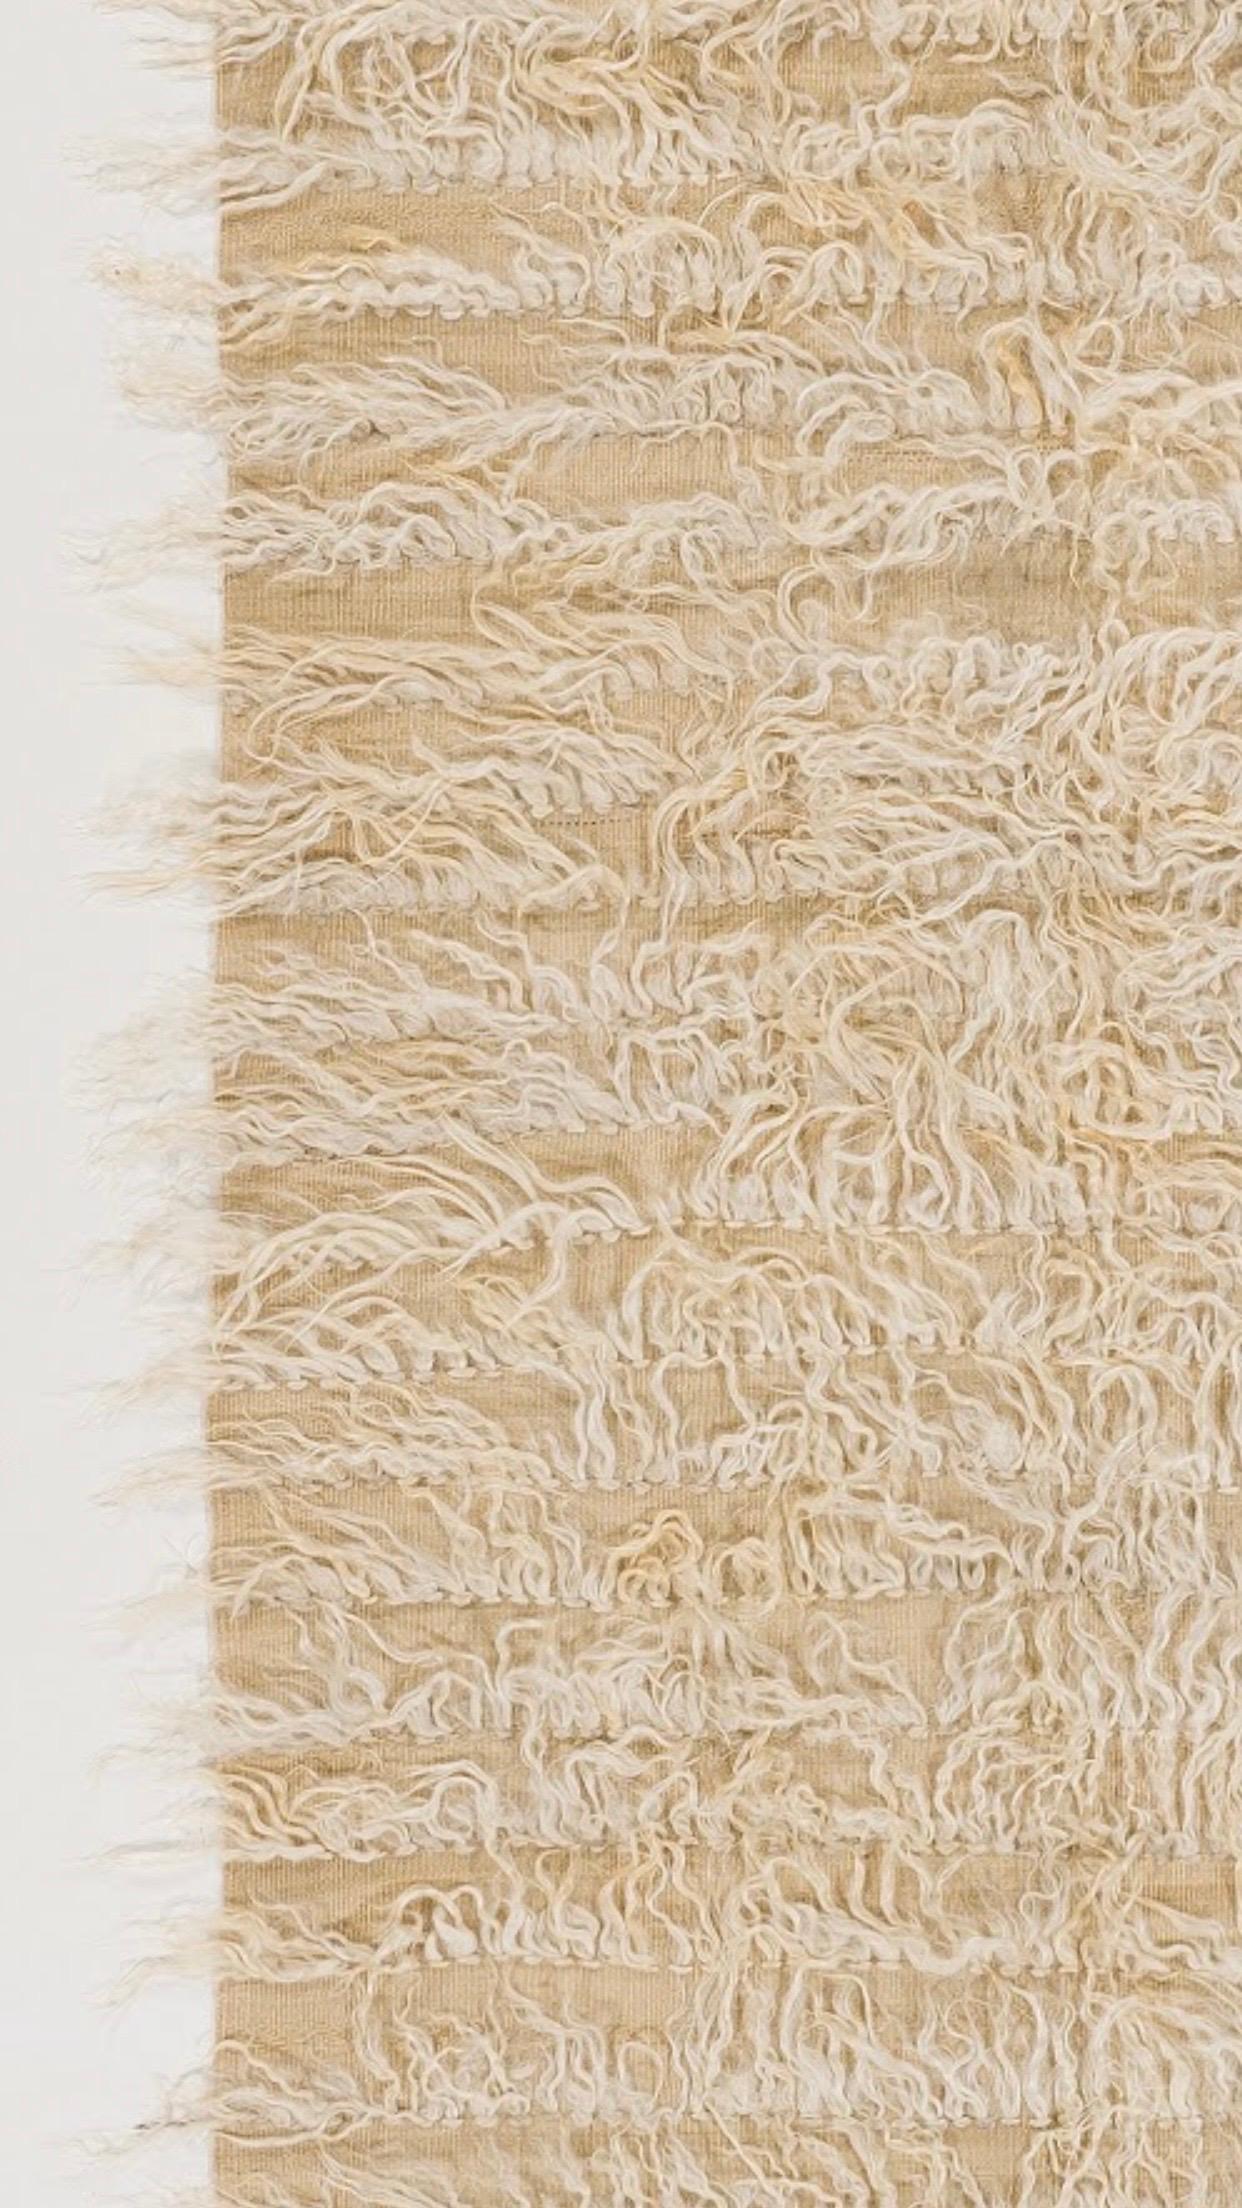 Turkish 3.7x10.9 Ft Vintage Plain Cream Tulu Rug. 100% Natural Undyed Mohair Wool Runner For Sale